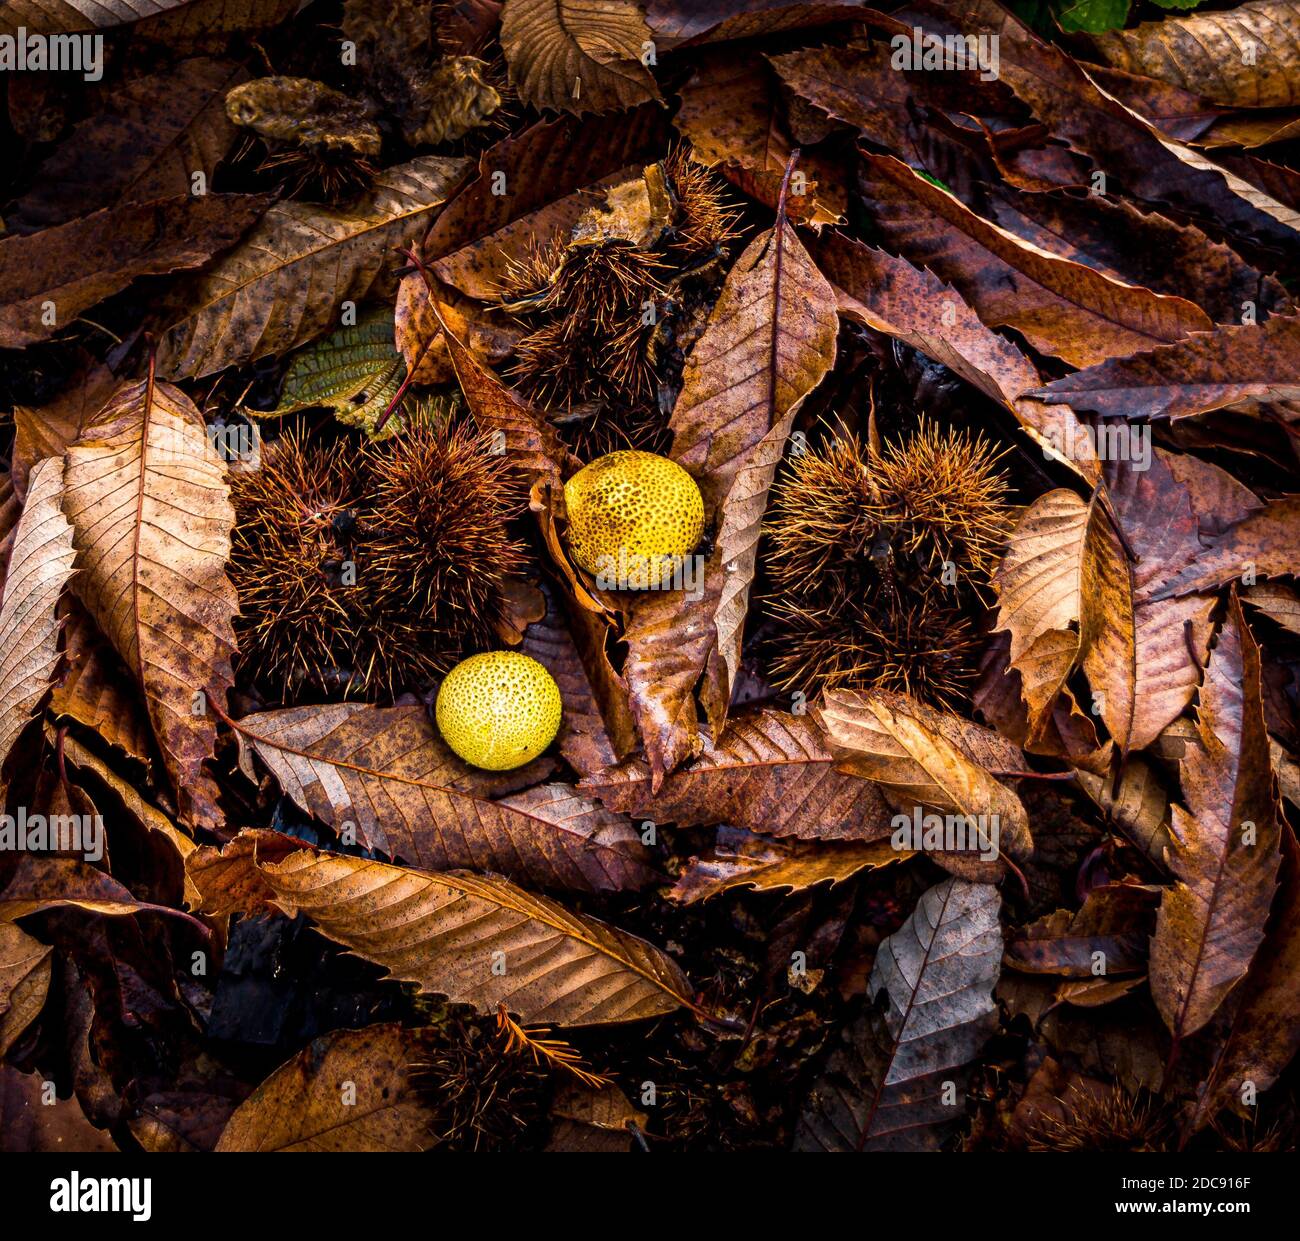 Two yellow mushrooms growing out of the autumn dead foliage Stock Photo